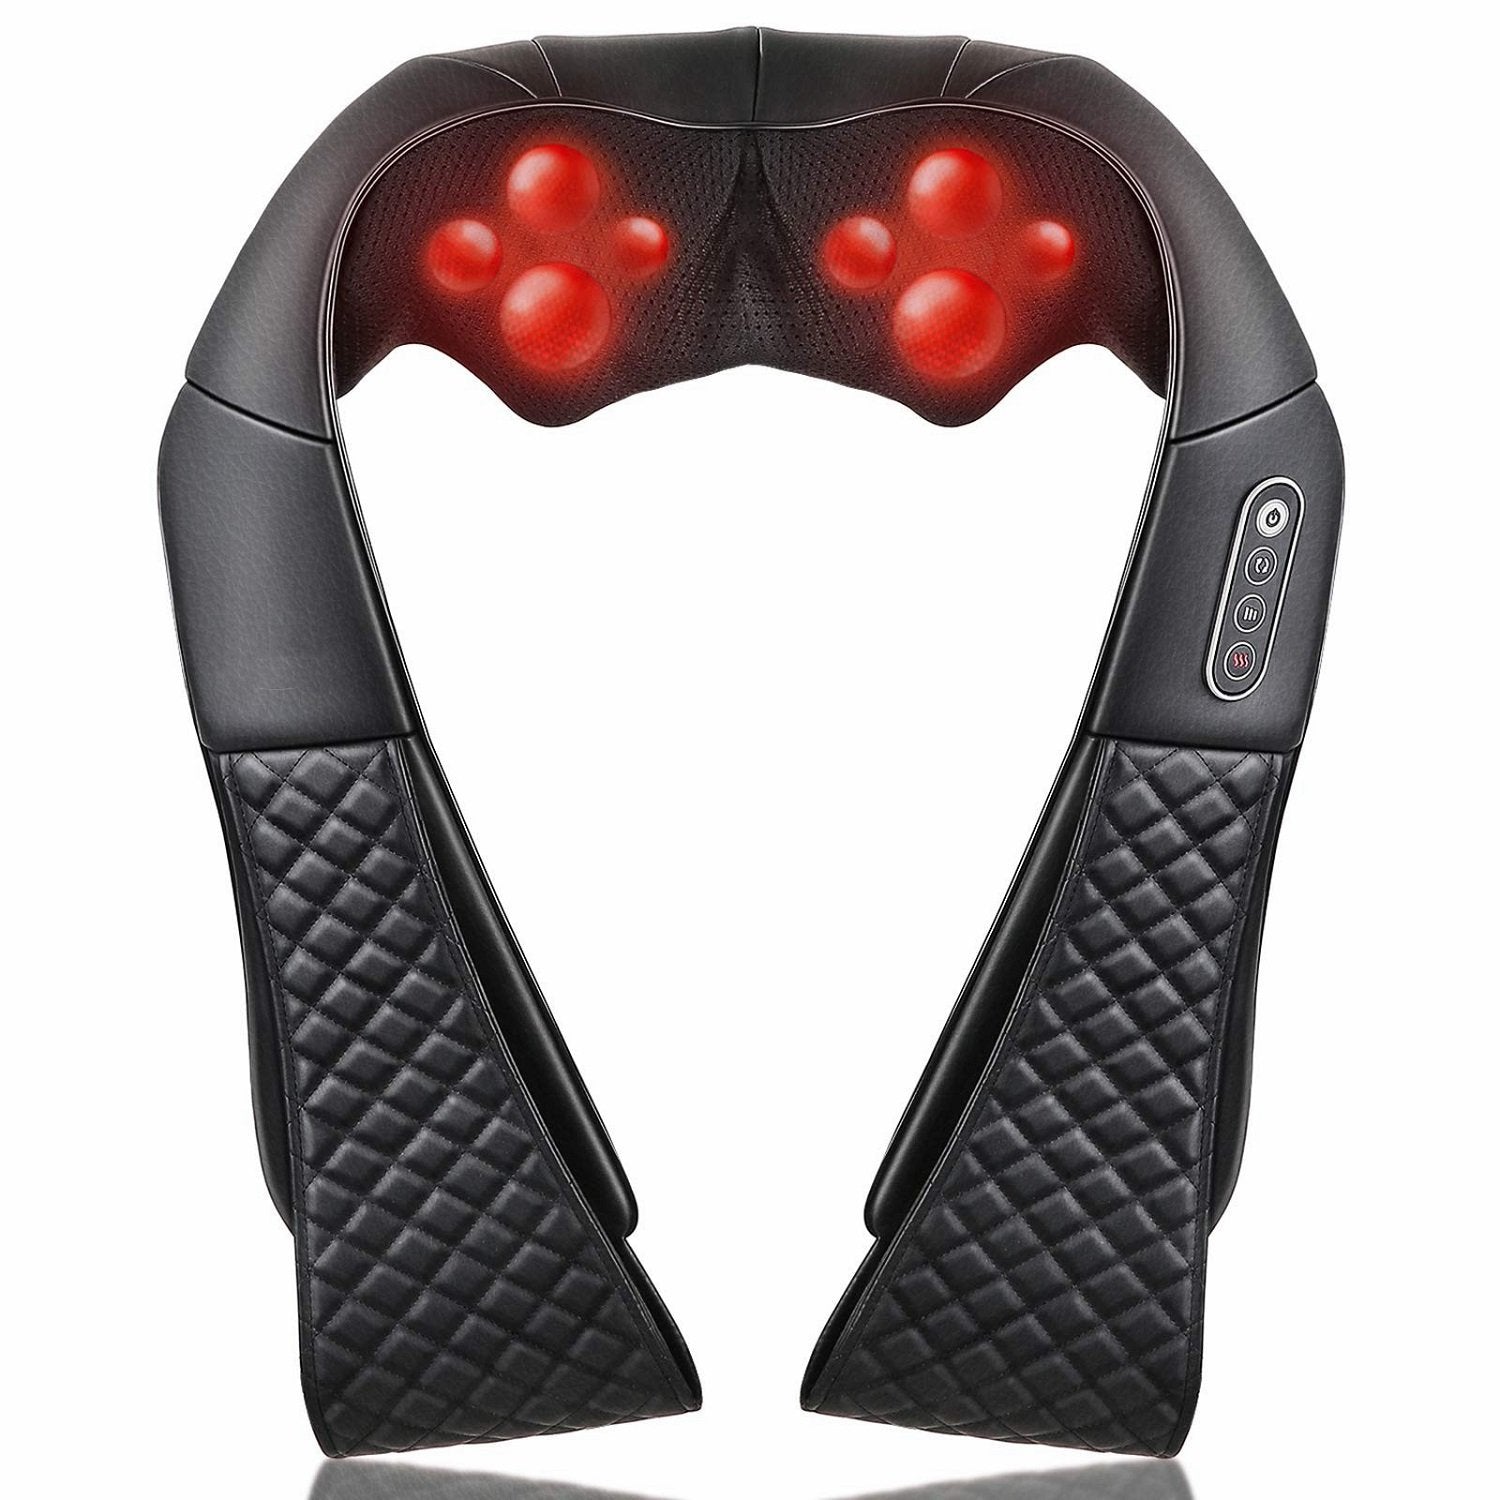 Dropship Electric Neck Massager U-Shaped Heating Shiatsu Back Shoulder  Massager Relaxation Tool US Plug 100-240V to Sell Online at a Lower Price